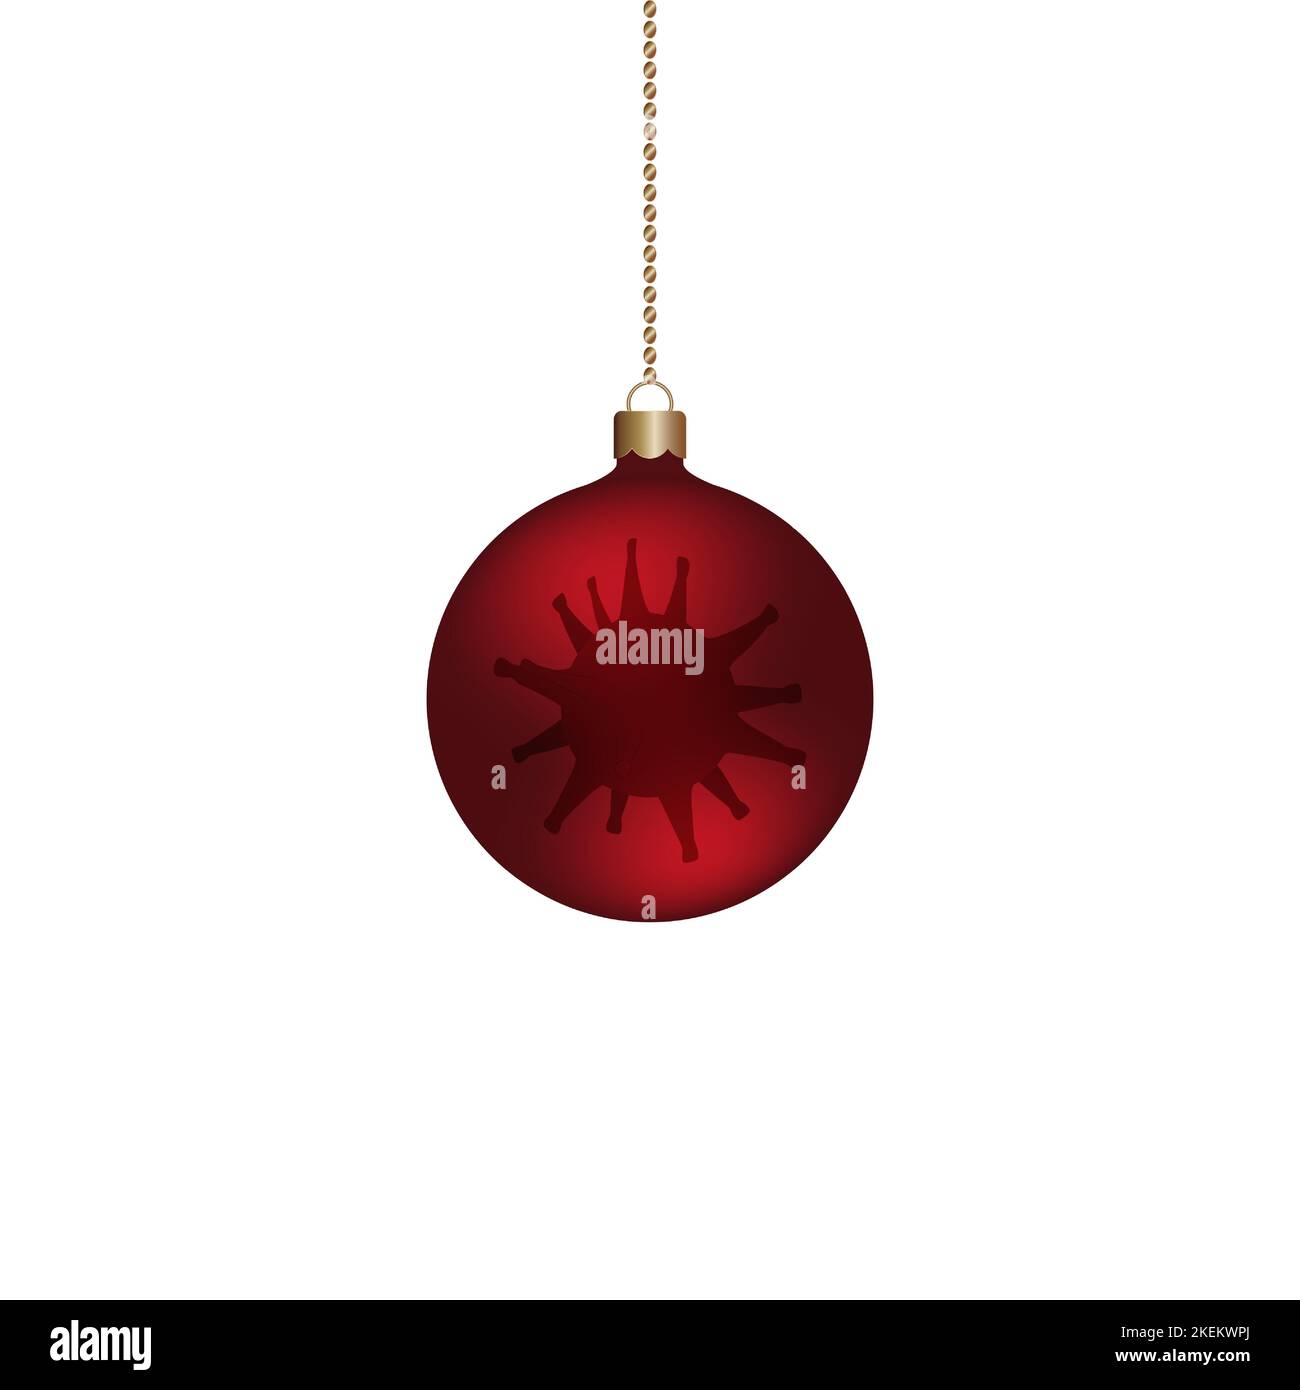 Christmas tree toy. Glass ball and coronavirus. Colored vector illustration. Isolated white background. The Christmas decoration is hung on a chain. Stock Vector